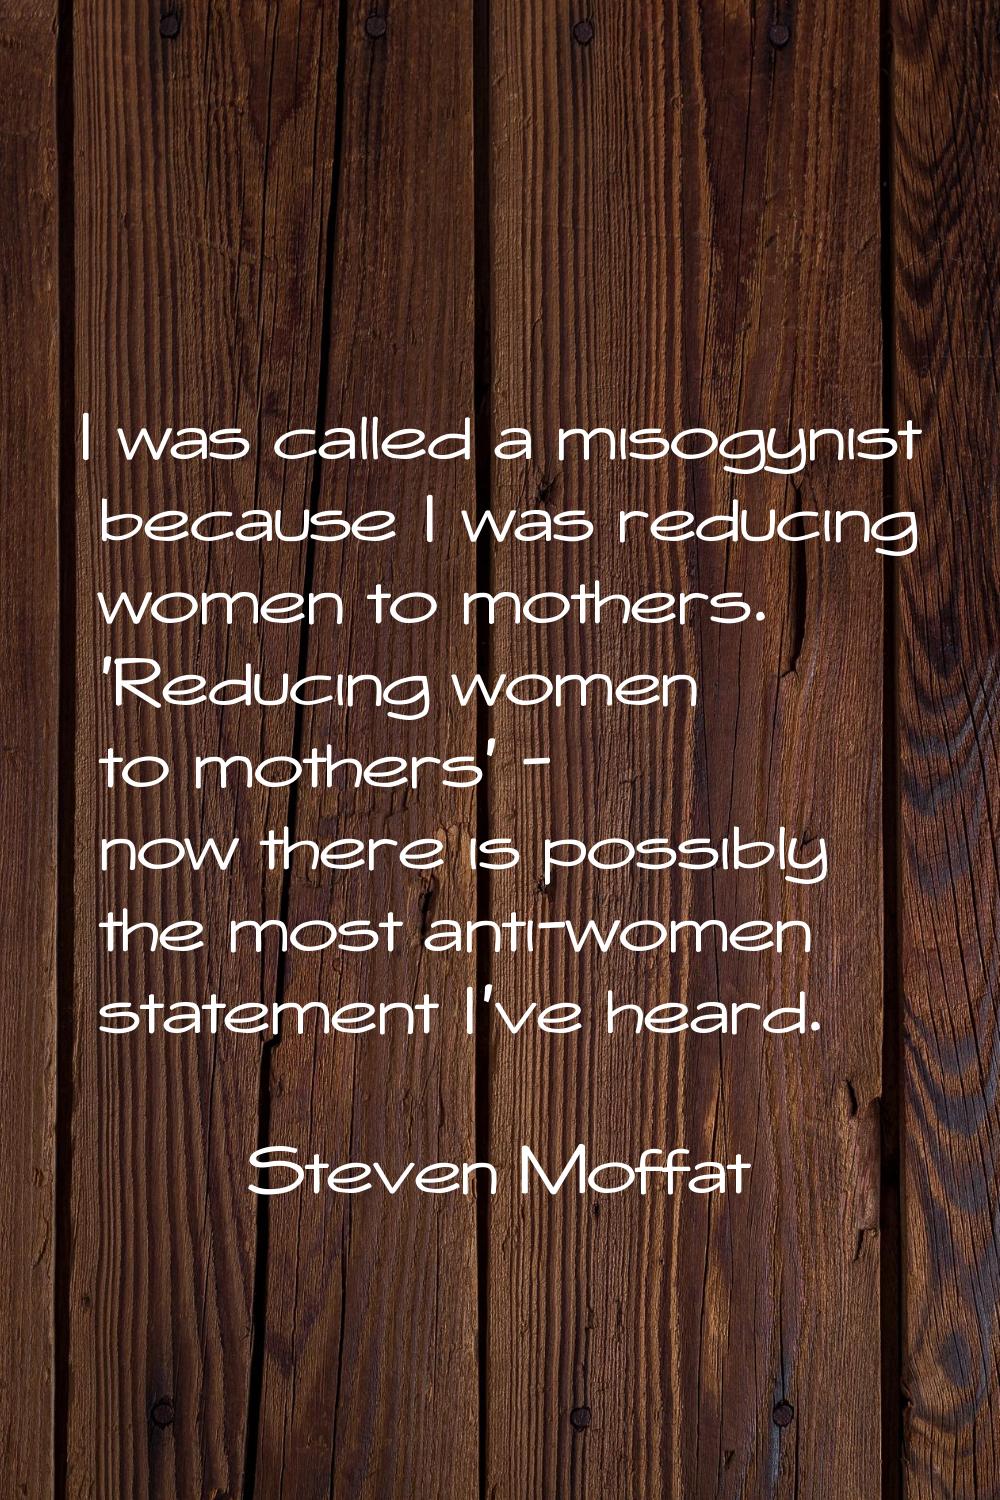 I was called a misogynist because I was reducing women to mothers. 'Reducing women to mothers' - no